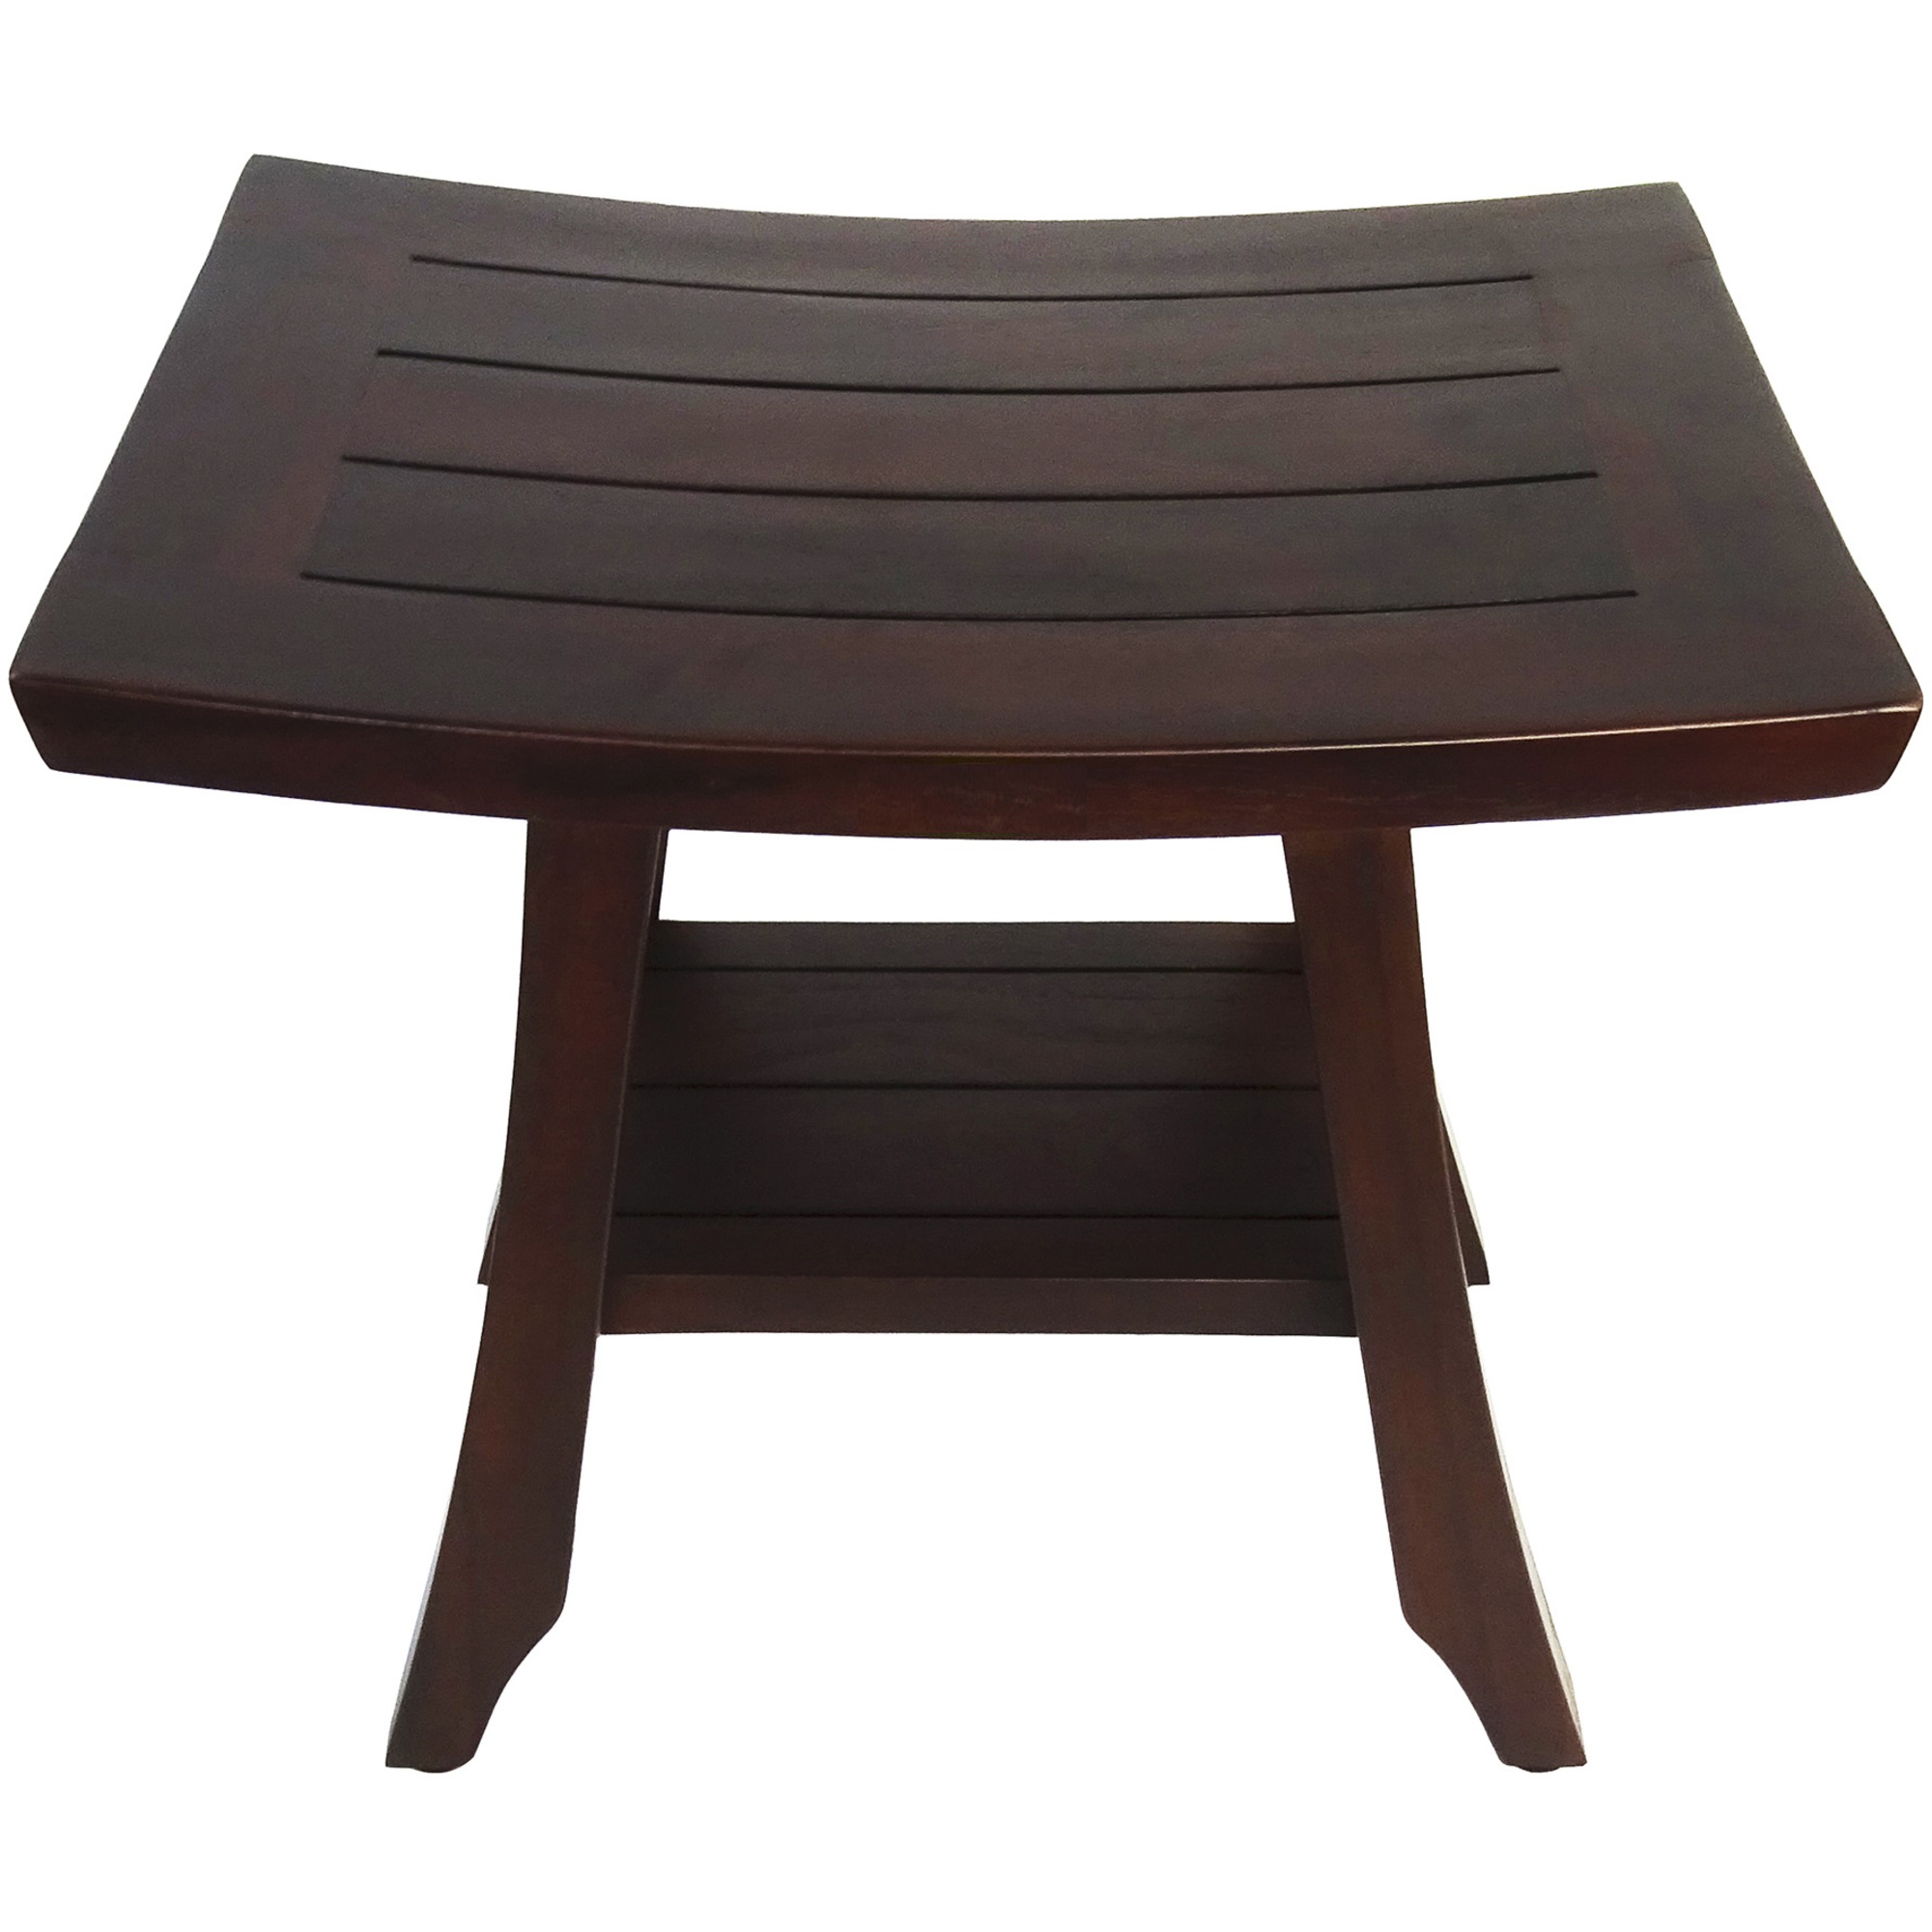 Compact Contemporary Teak Shower Stool in Brown Finish